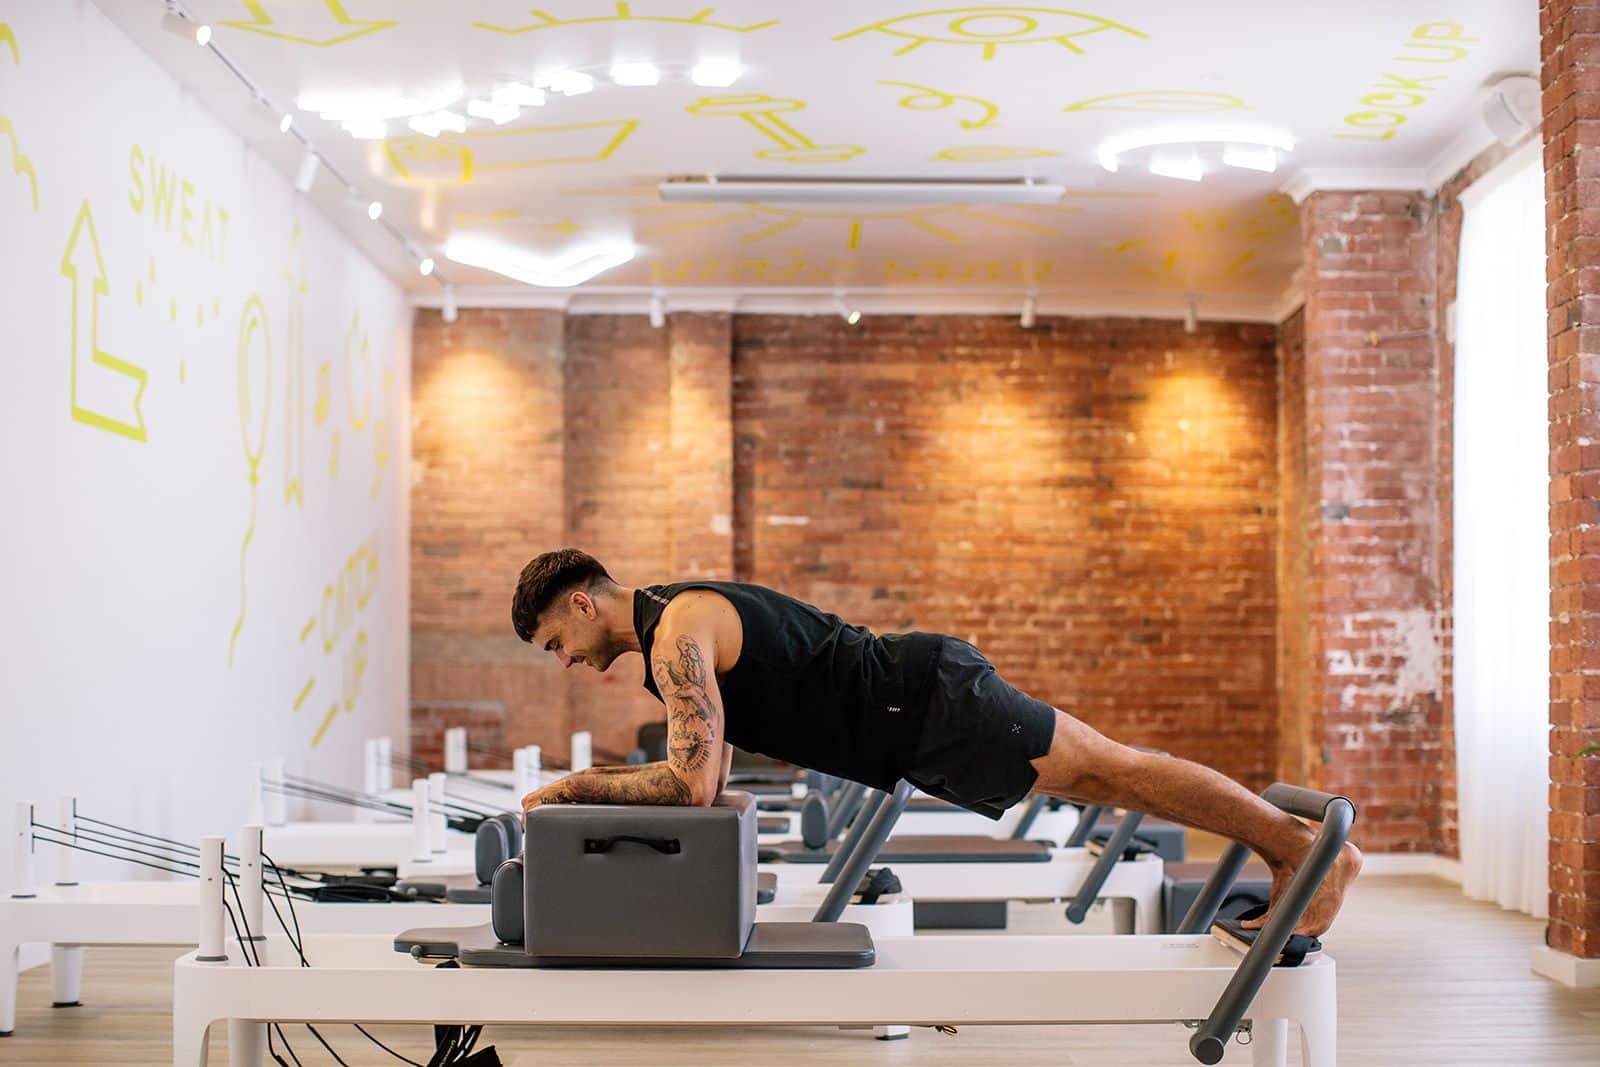 Man gets strong as he does a plank on a reformer bed at Upstate Balaclava. He works out happily in a cool motivating fitness studio space.